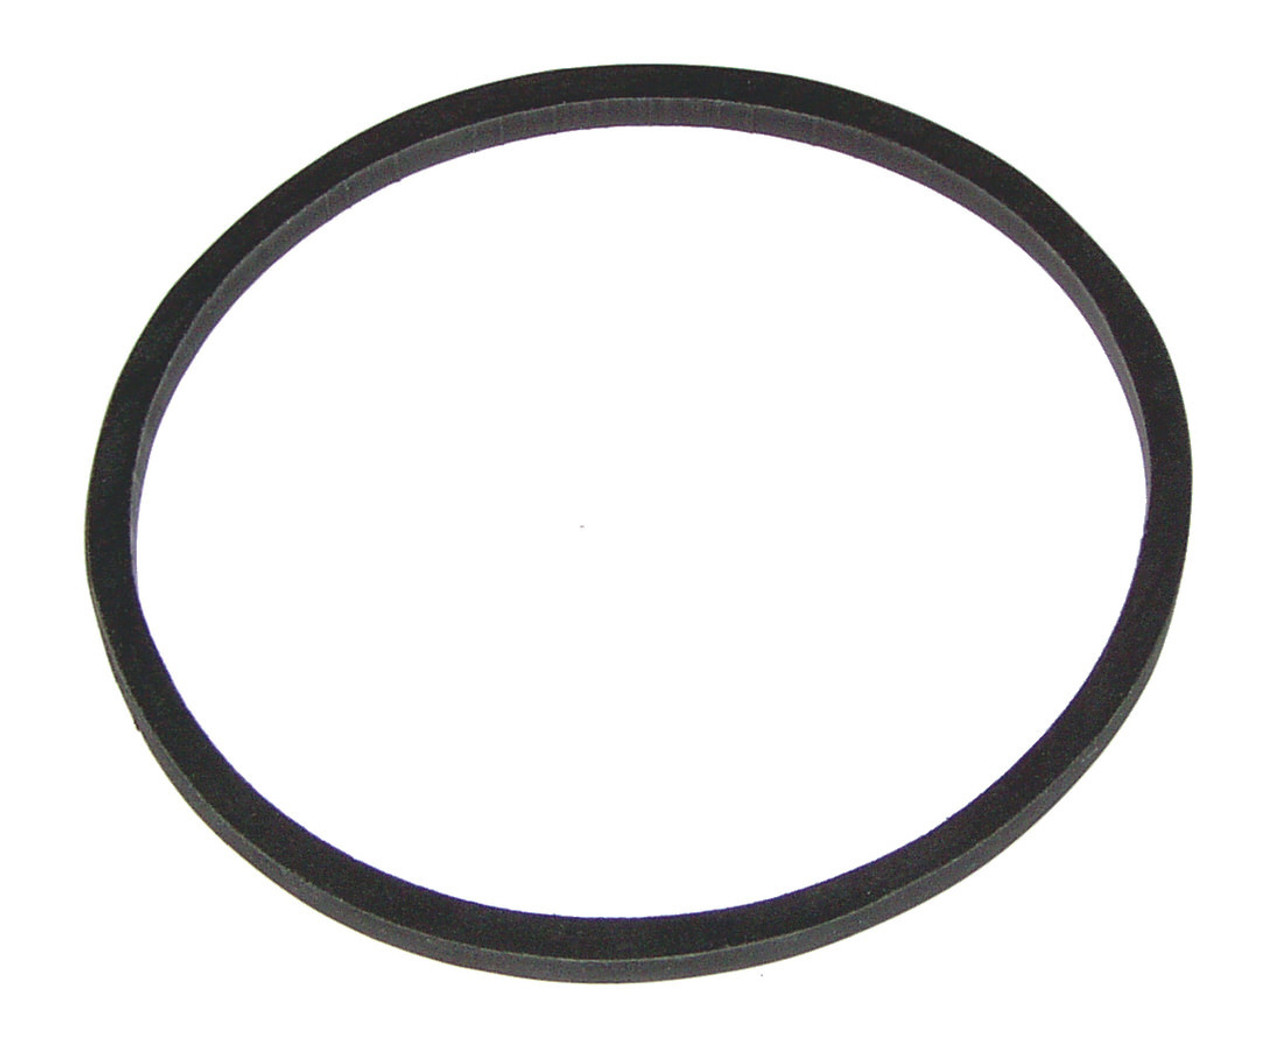 Gasket For Fuel Cell Cap Raised Plastic